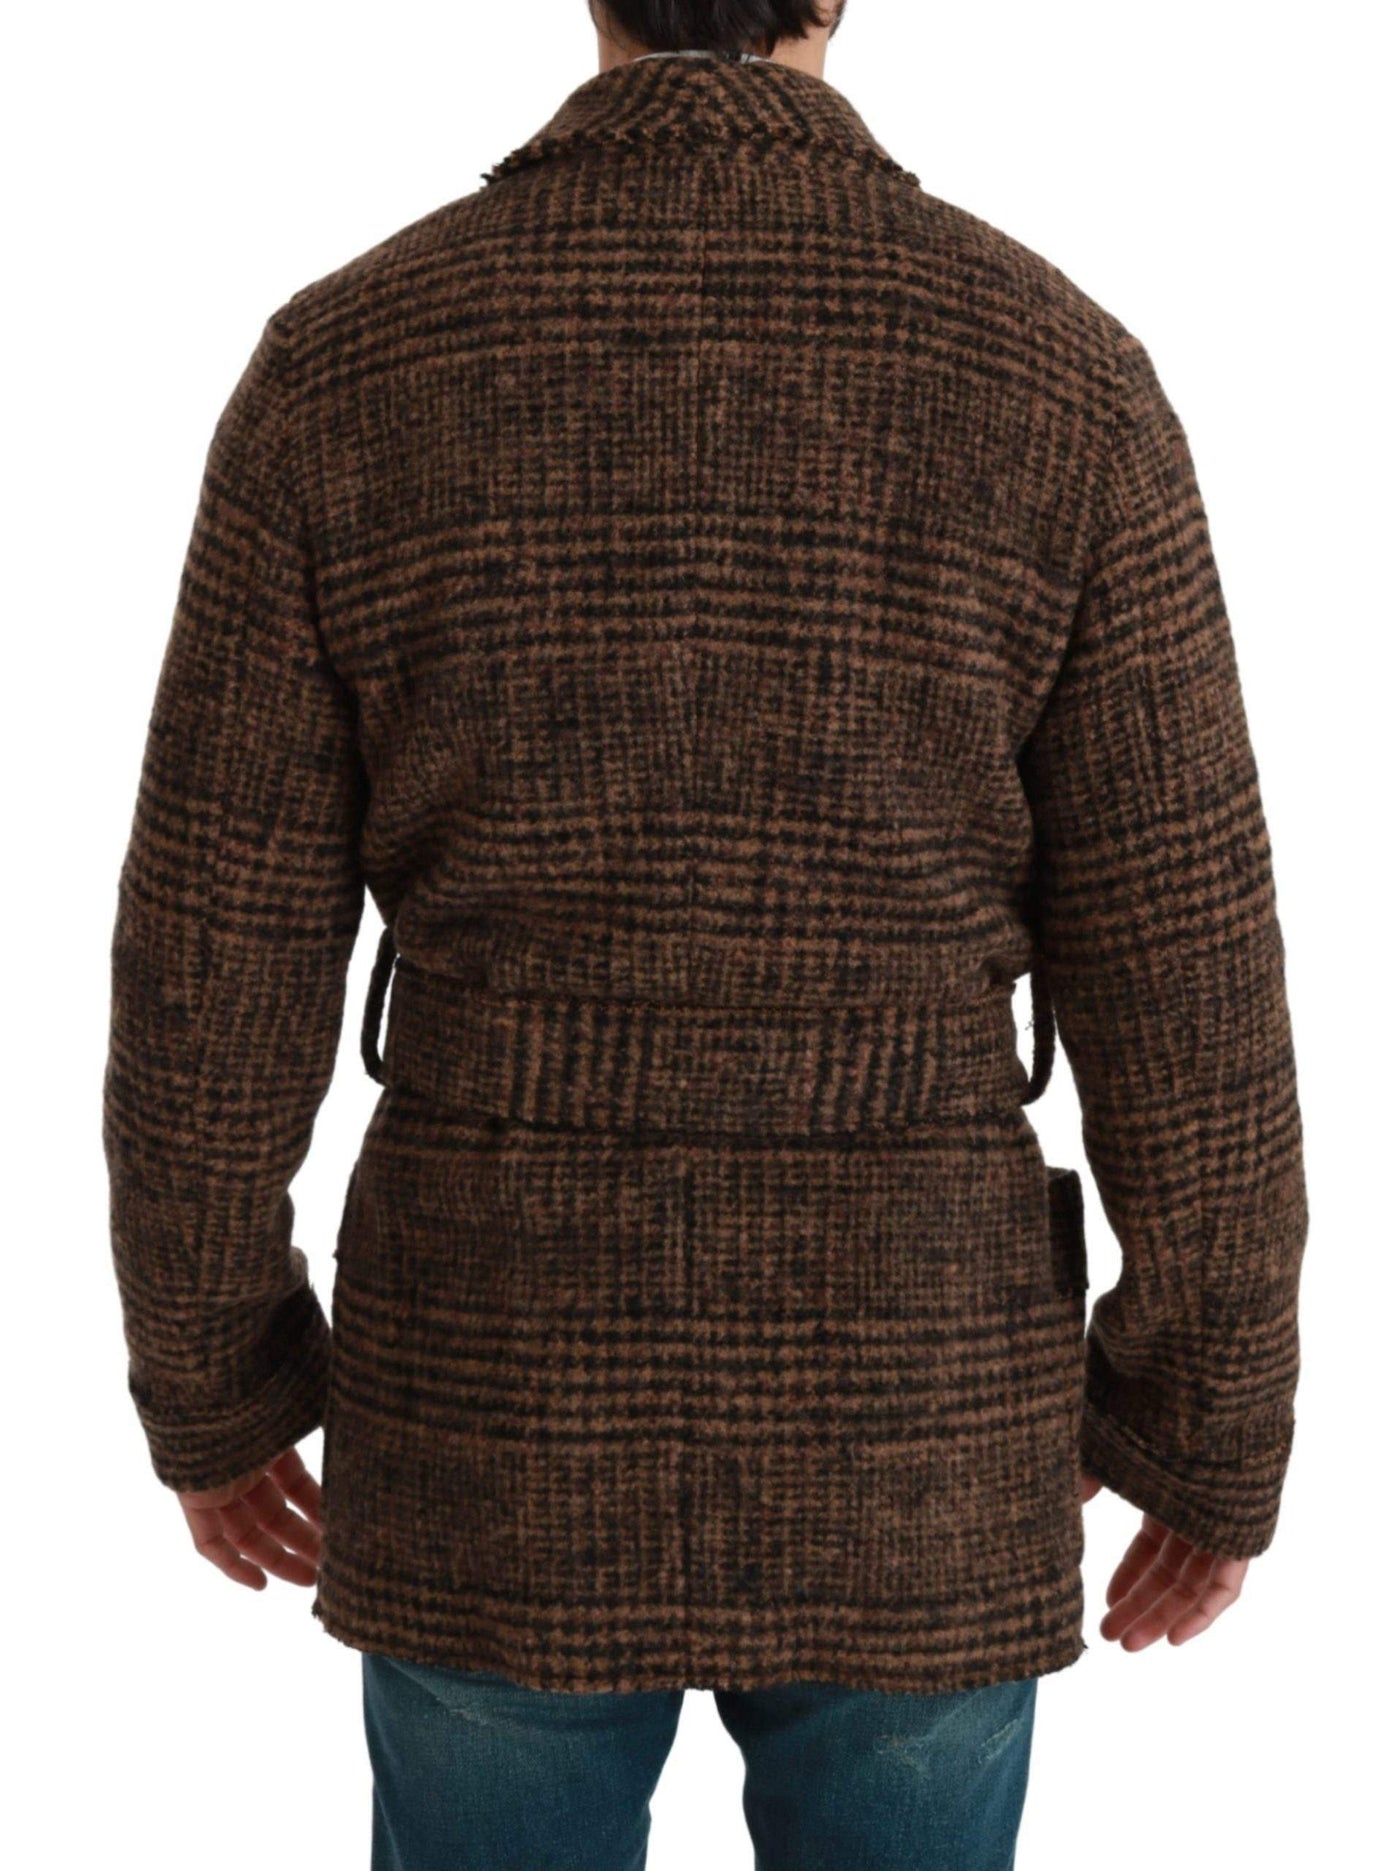 Dolce & Gabbana  Brown Checkered Wool Robe Coat  Wrap Jacket #men, Brand_Dolce & Gabbana, Brown, Catch, Dolce & Gabbana, feed-agegroup-adult, feed-color-brown, feed-gender-male, feed-size-IT44 | XS, feed-size-IT46 | S, feed-size-IT48 | M, Gender_Men, IT44 | XS, IT46 | S, IT48 | M, Jackets - Men - Clothing, Kogan, Men - New Arrivals at SEYMAYKA